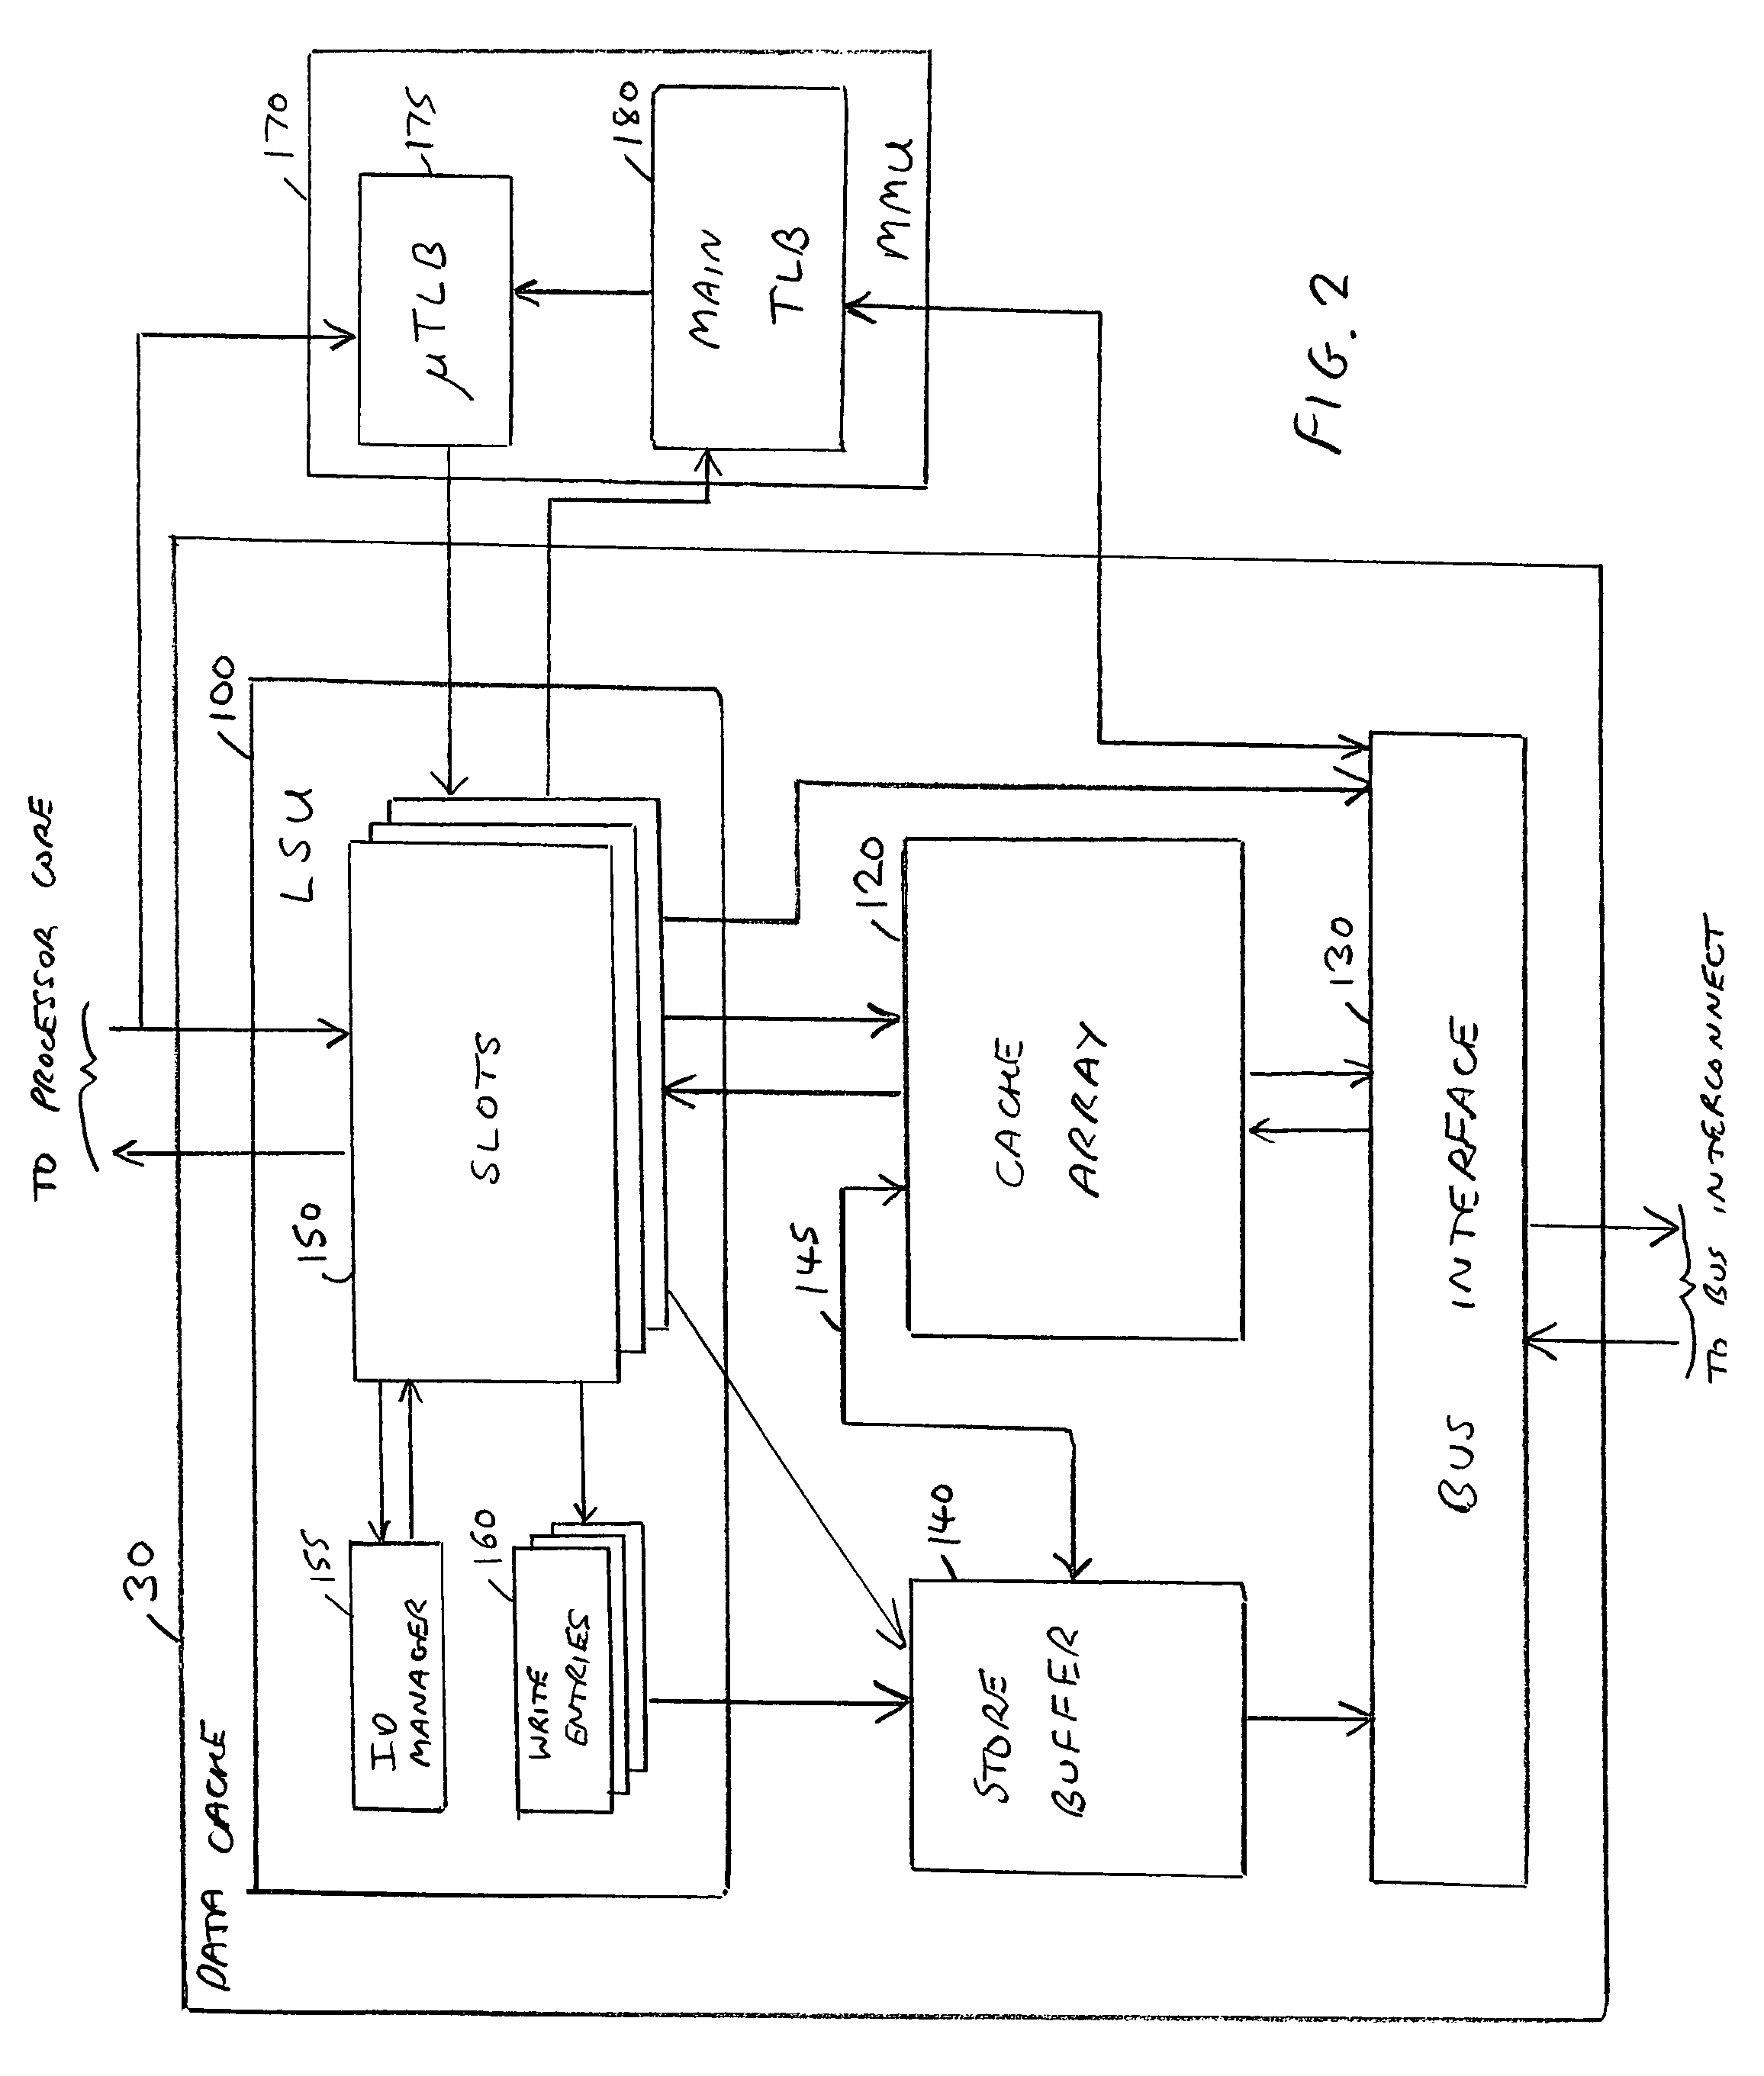 Cache circuitry, data processing apparatus and method for handling write access requests